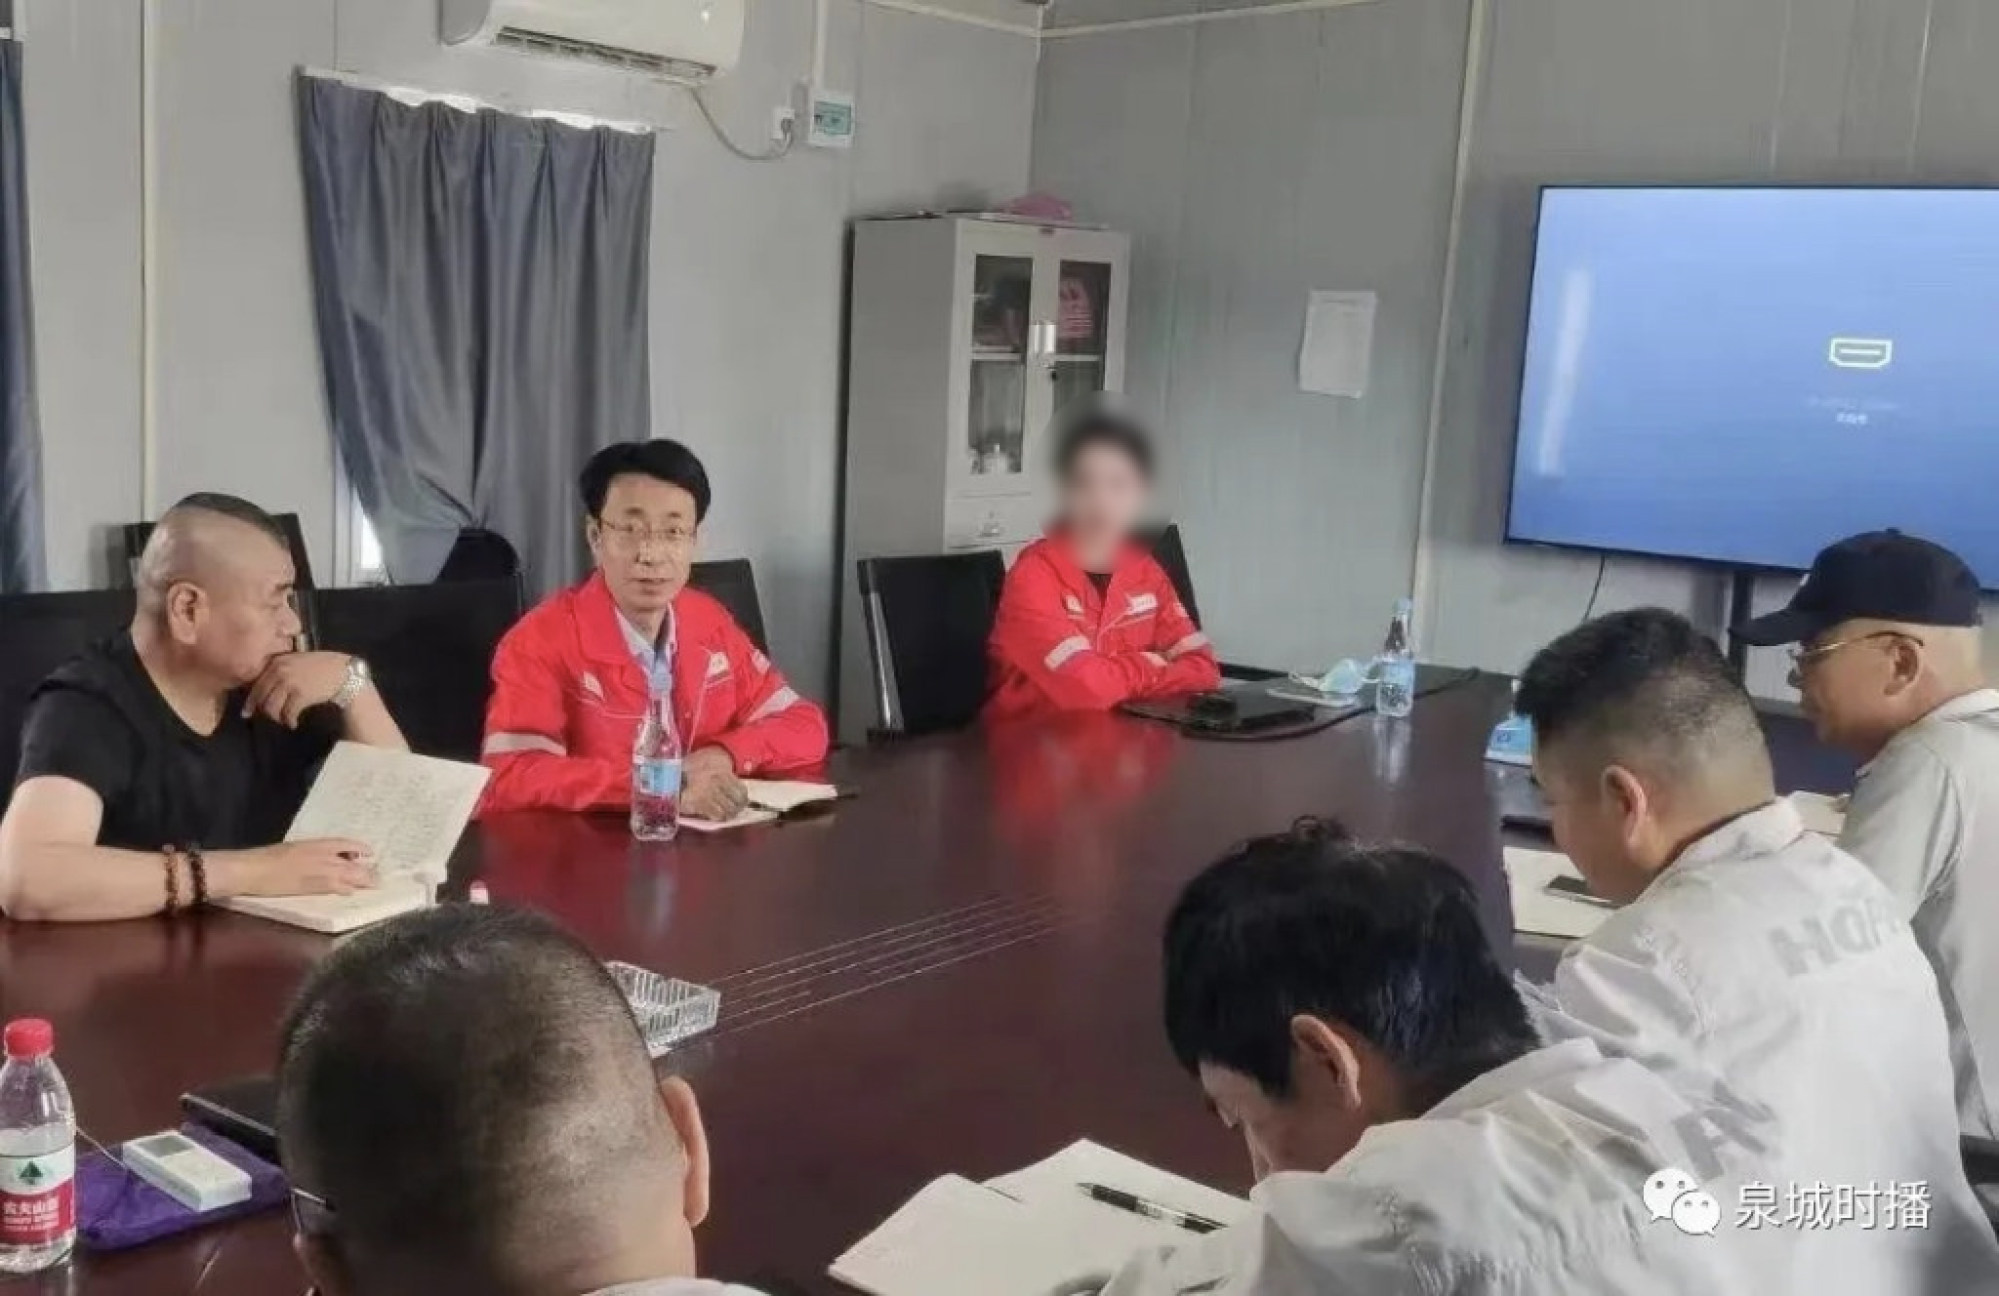 After what has been described as a “comprehensive and thorough” investigation, Hu Jiyong (in red jacket, centre) has been stripped of his Communist Party membership. Photo: Weibo